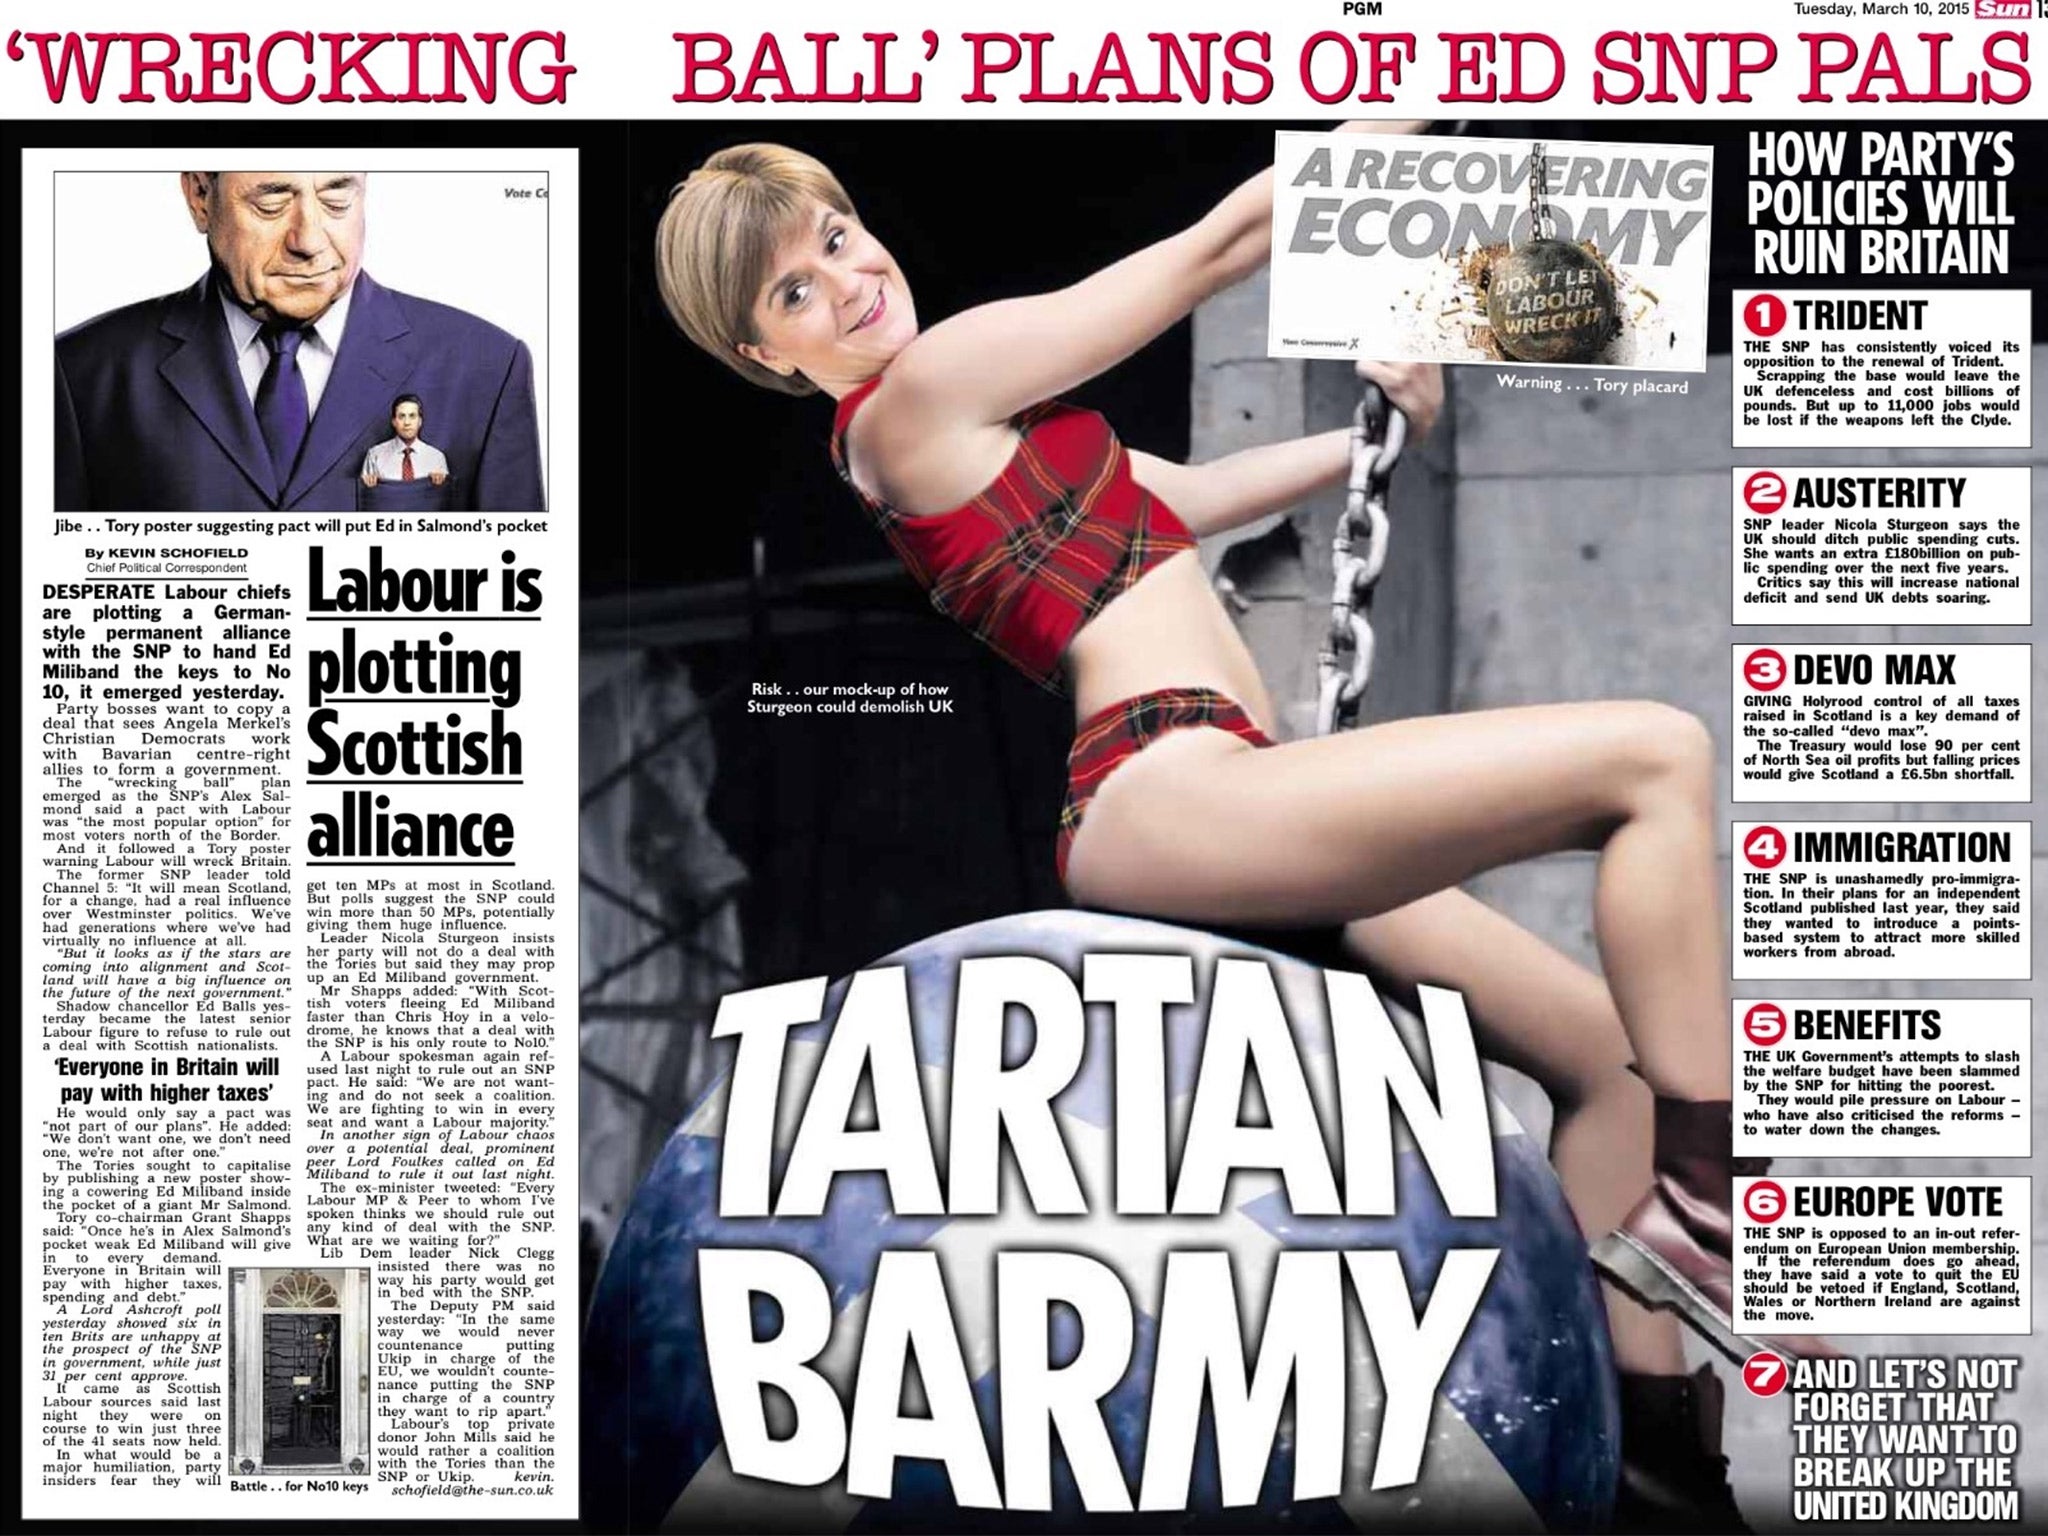 Nicola Sturgeon's face was cropped onto a picture of Miley Cyrus riding a wrecking ball by 'The Sun' earlier this year